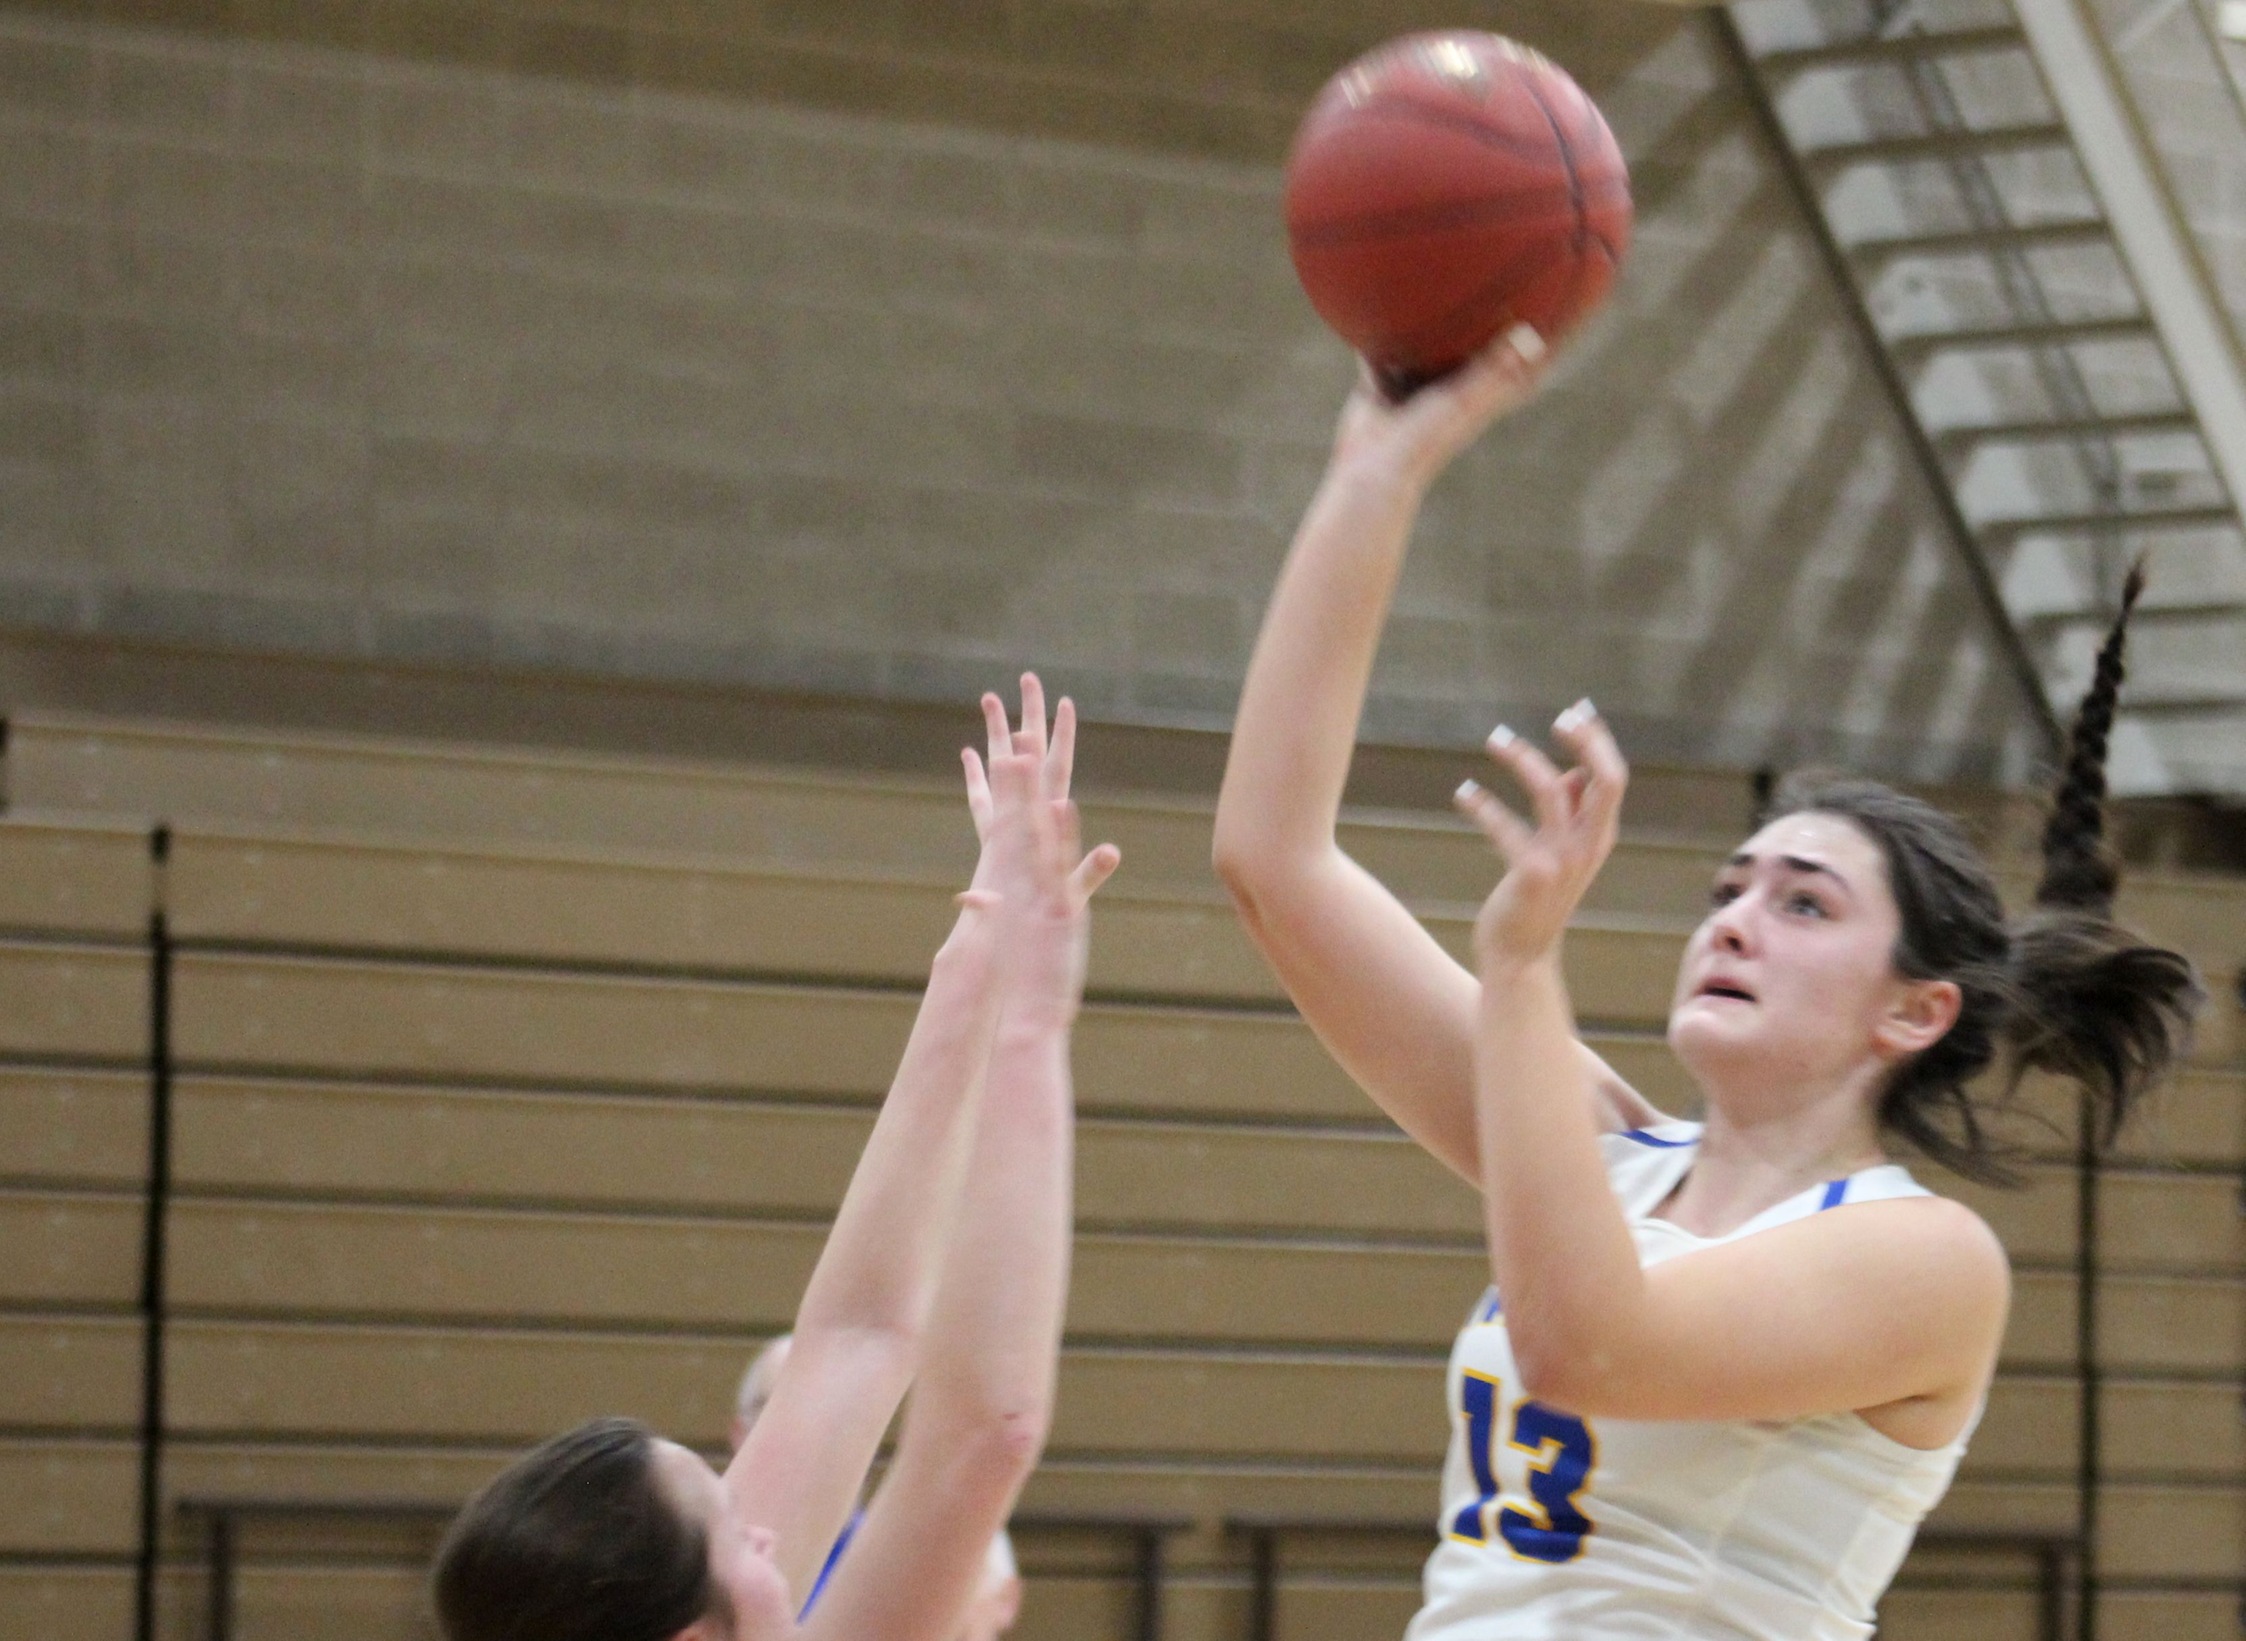 NIACC's Kayla Clewley shoots a short shot in the lane in an exhibition against William Penn.